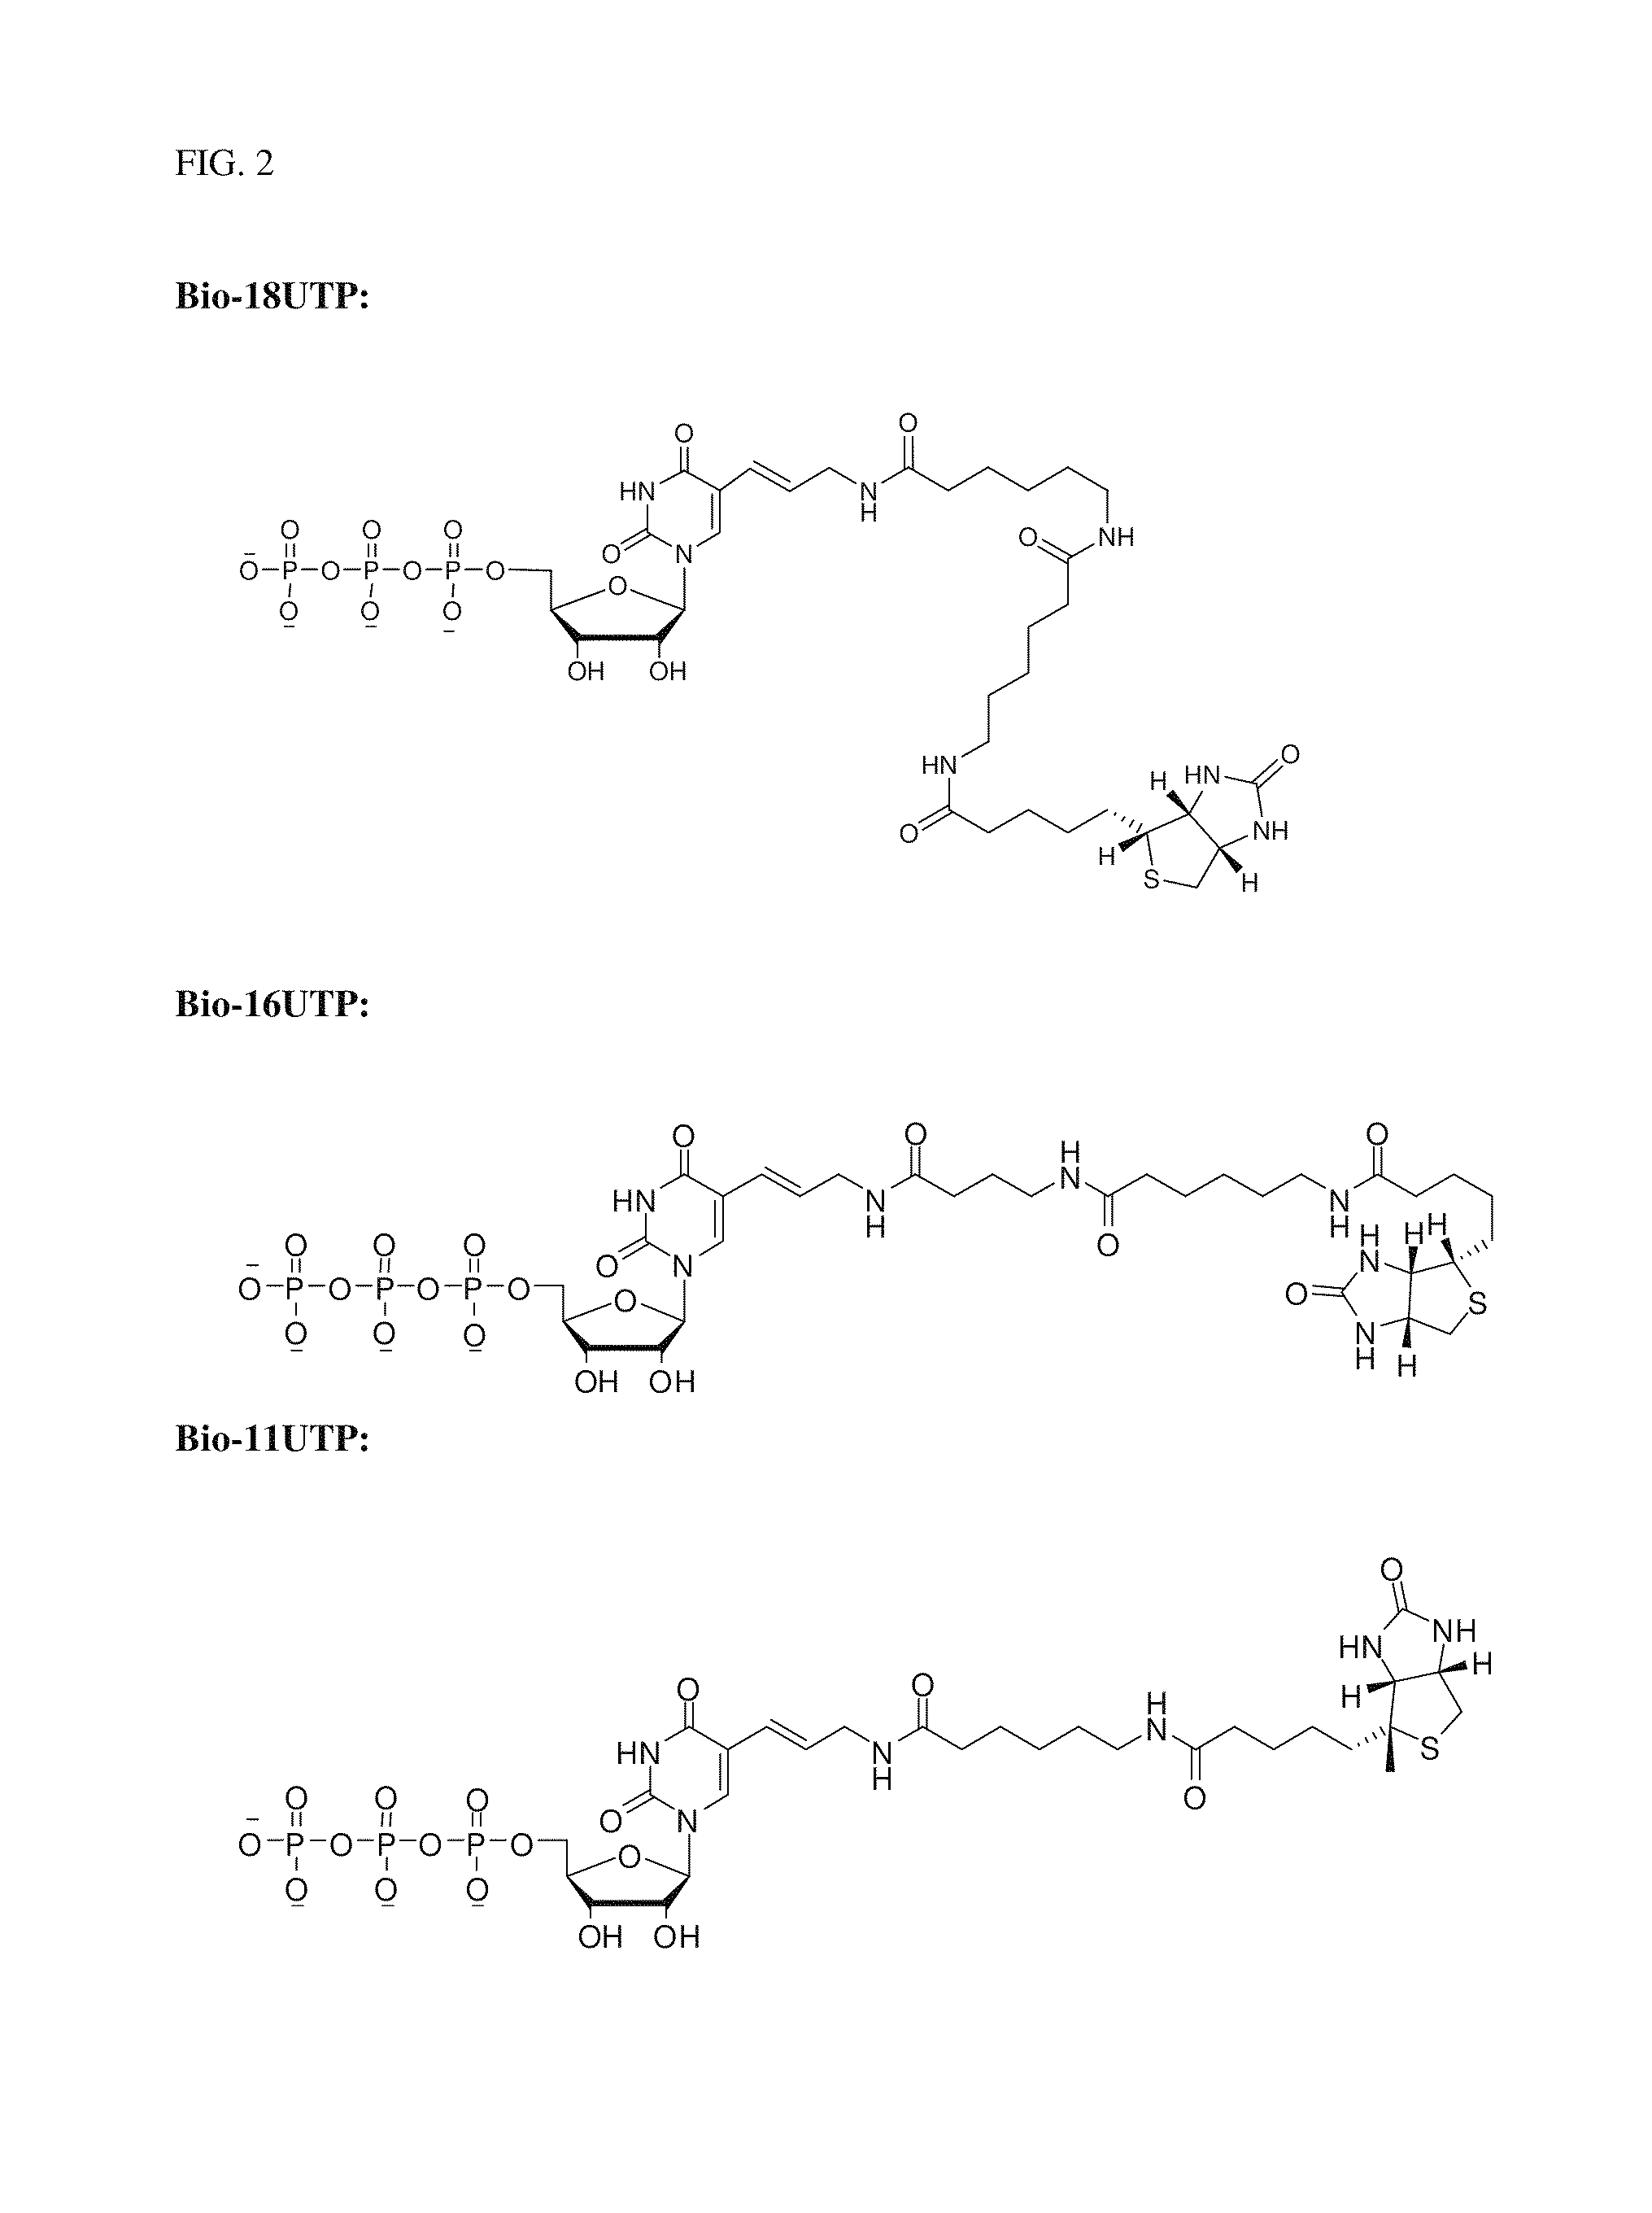 Preparation and isolation of 5′ capped mRNA